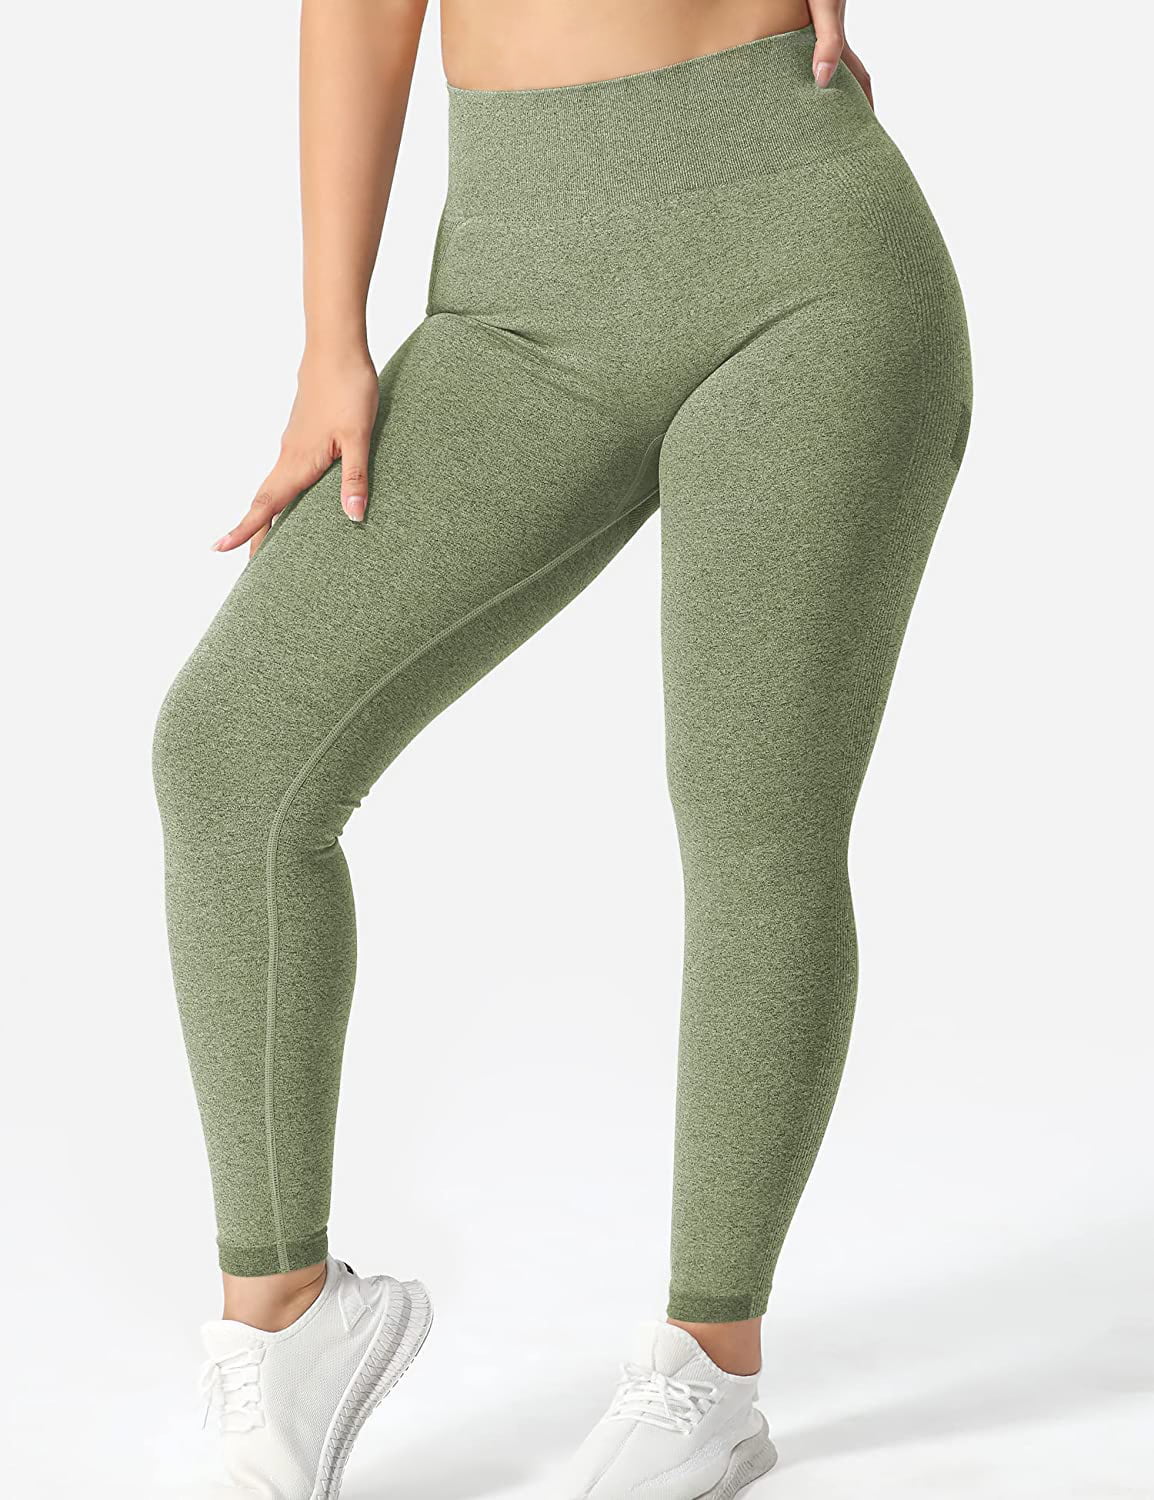  WALKFB Women's High Waisted Yoga Pants Tummy Control Workout  Leggings Butt Lift Seamless Stretchy Running Gym Sports Pants Army Green :  Sports & Outdoors